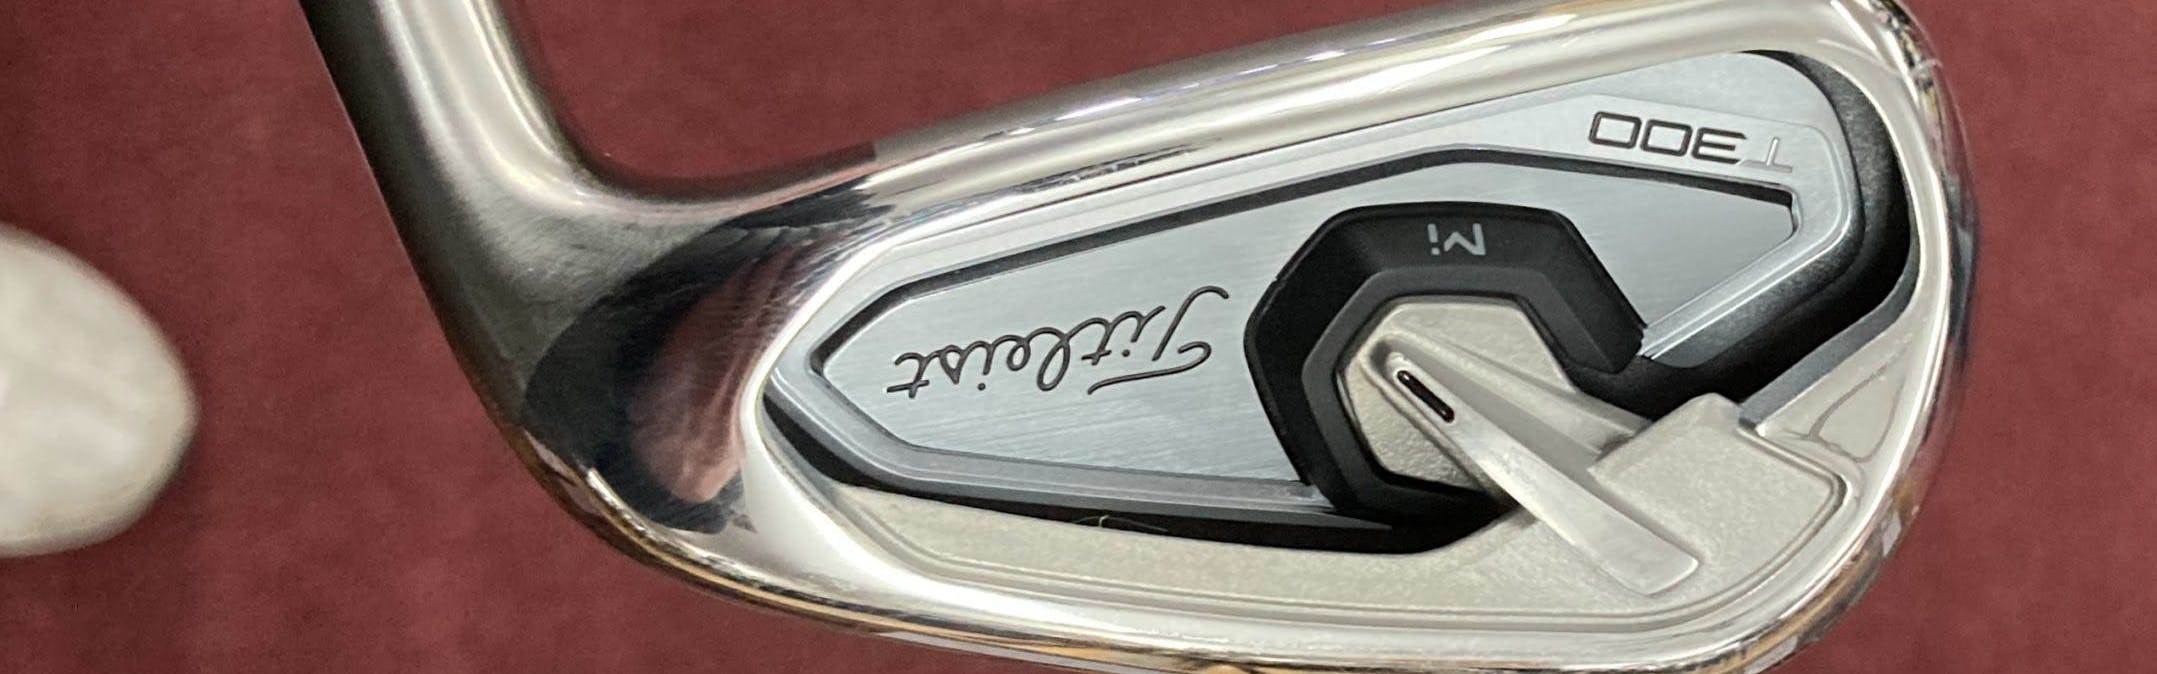 The Titleist T300 Irons.